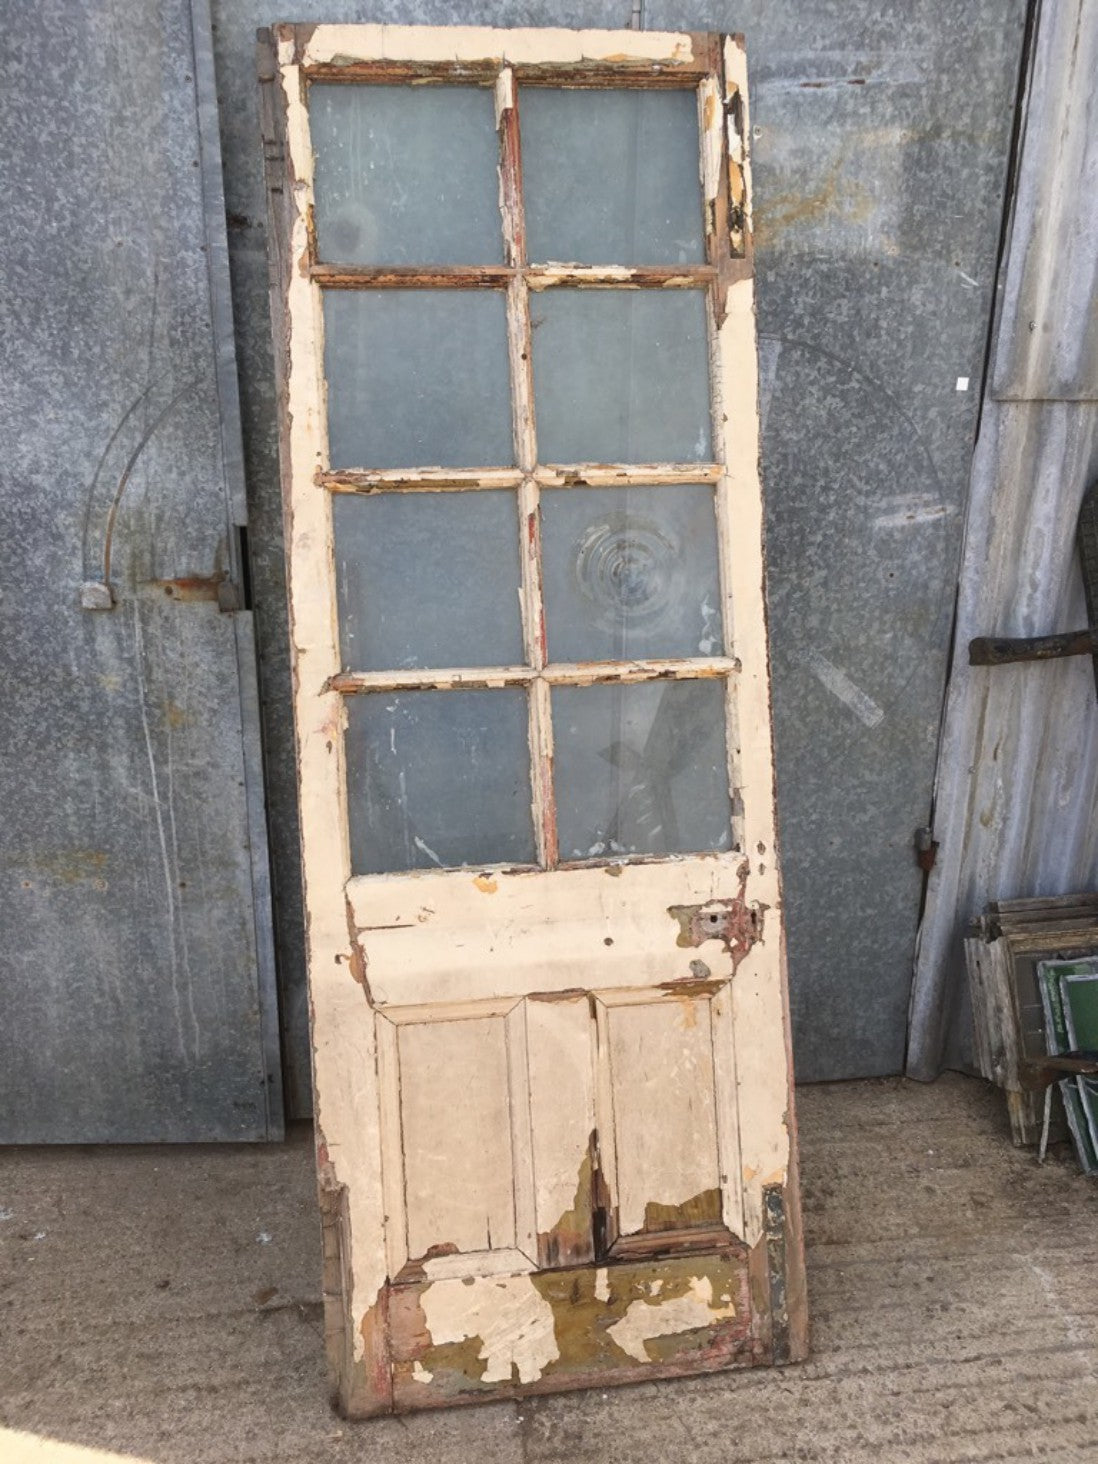 32 3/8”x90 1/2” Glazed Victorian Painted Pine Two Panel Tall Internal Door